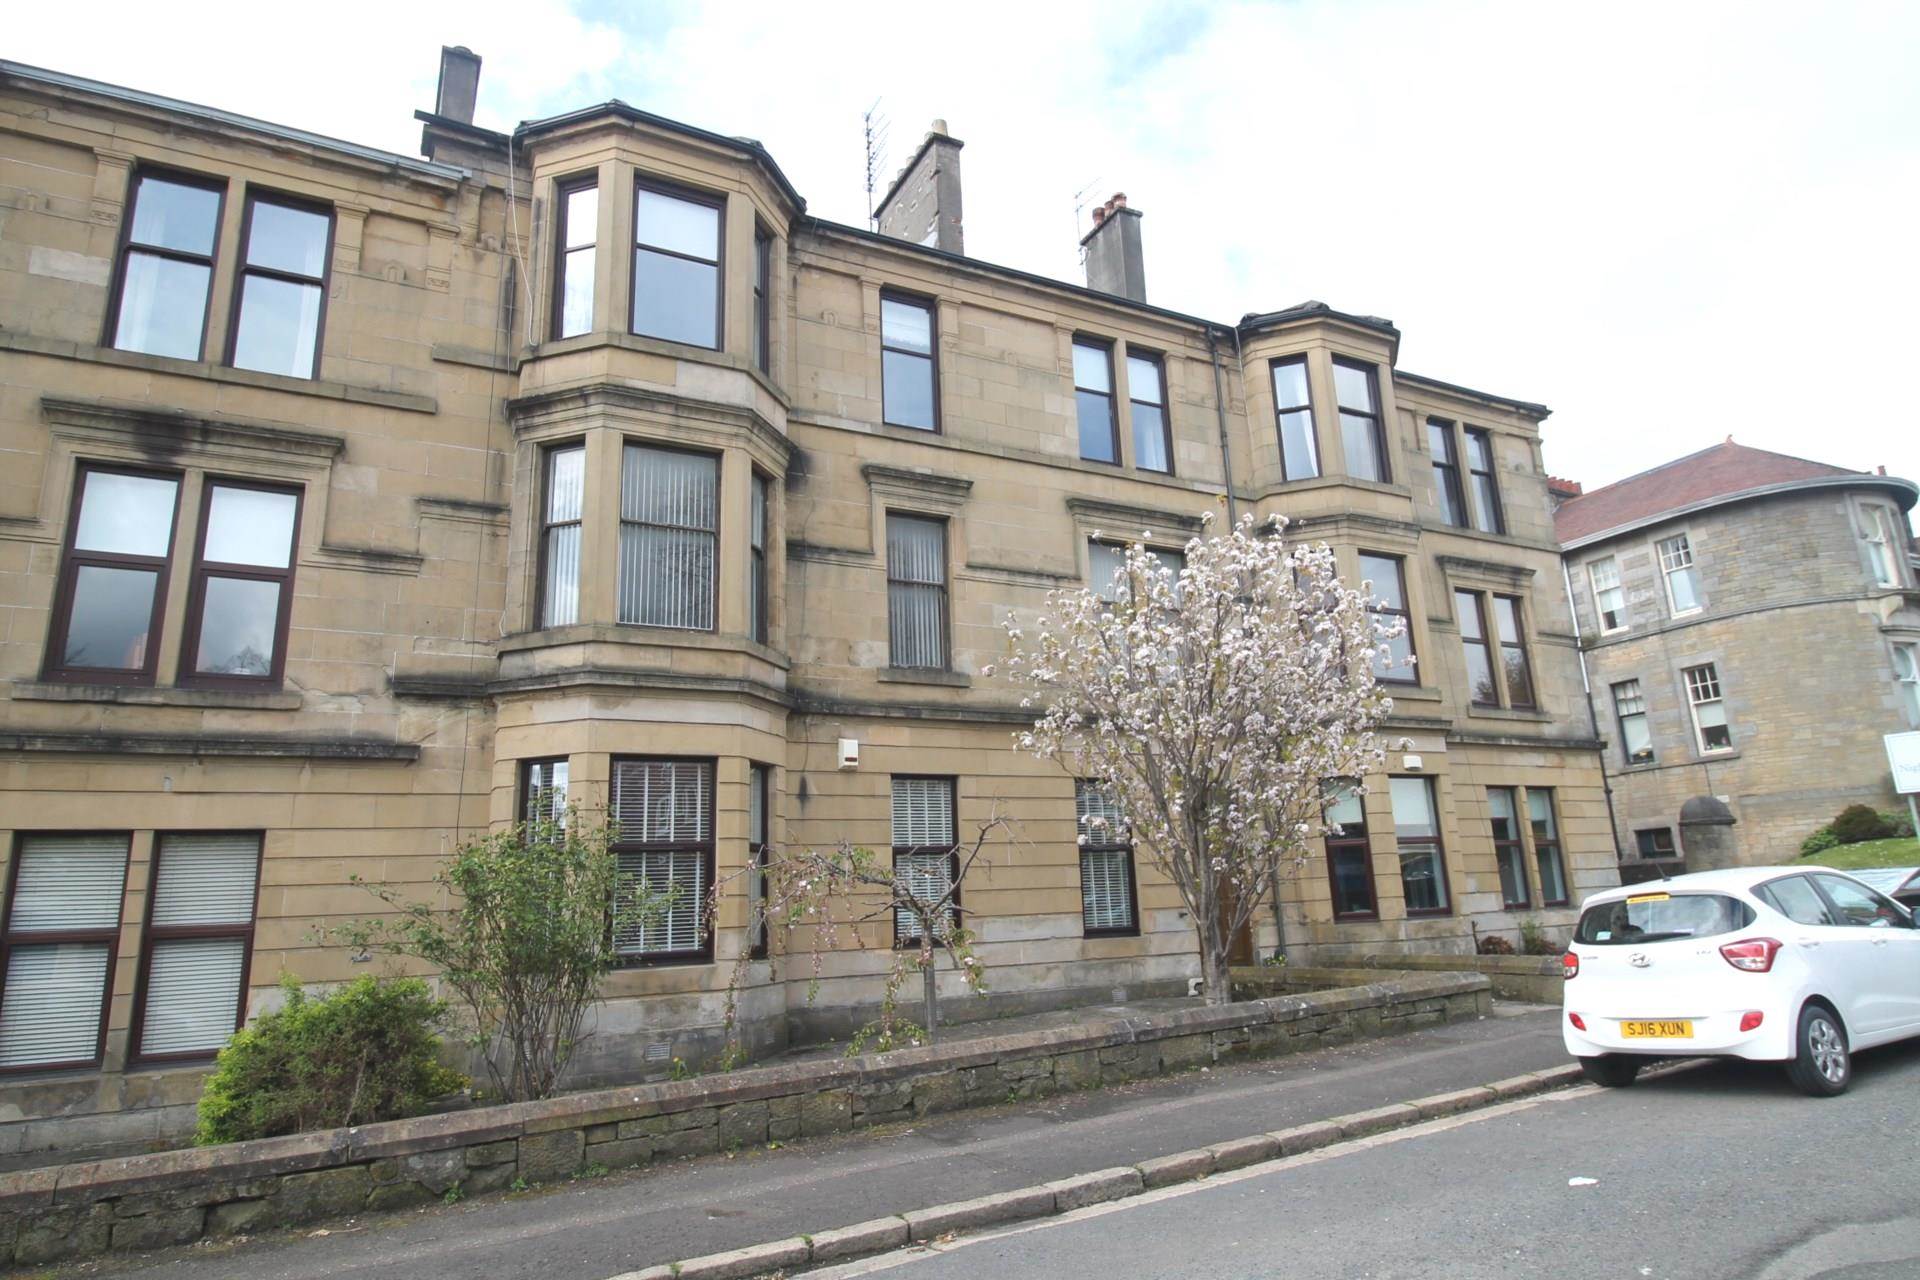 3 bed Flat for rent in Paisley. From LM Properties